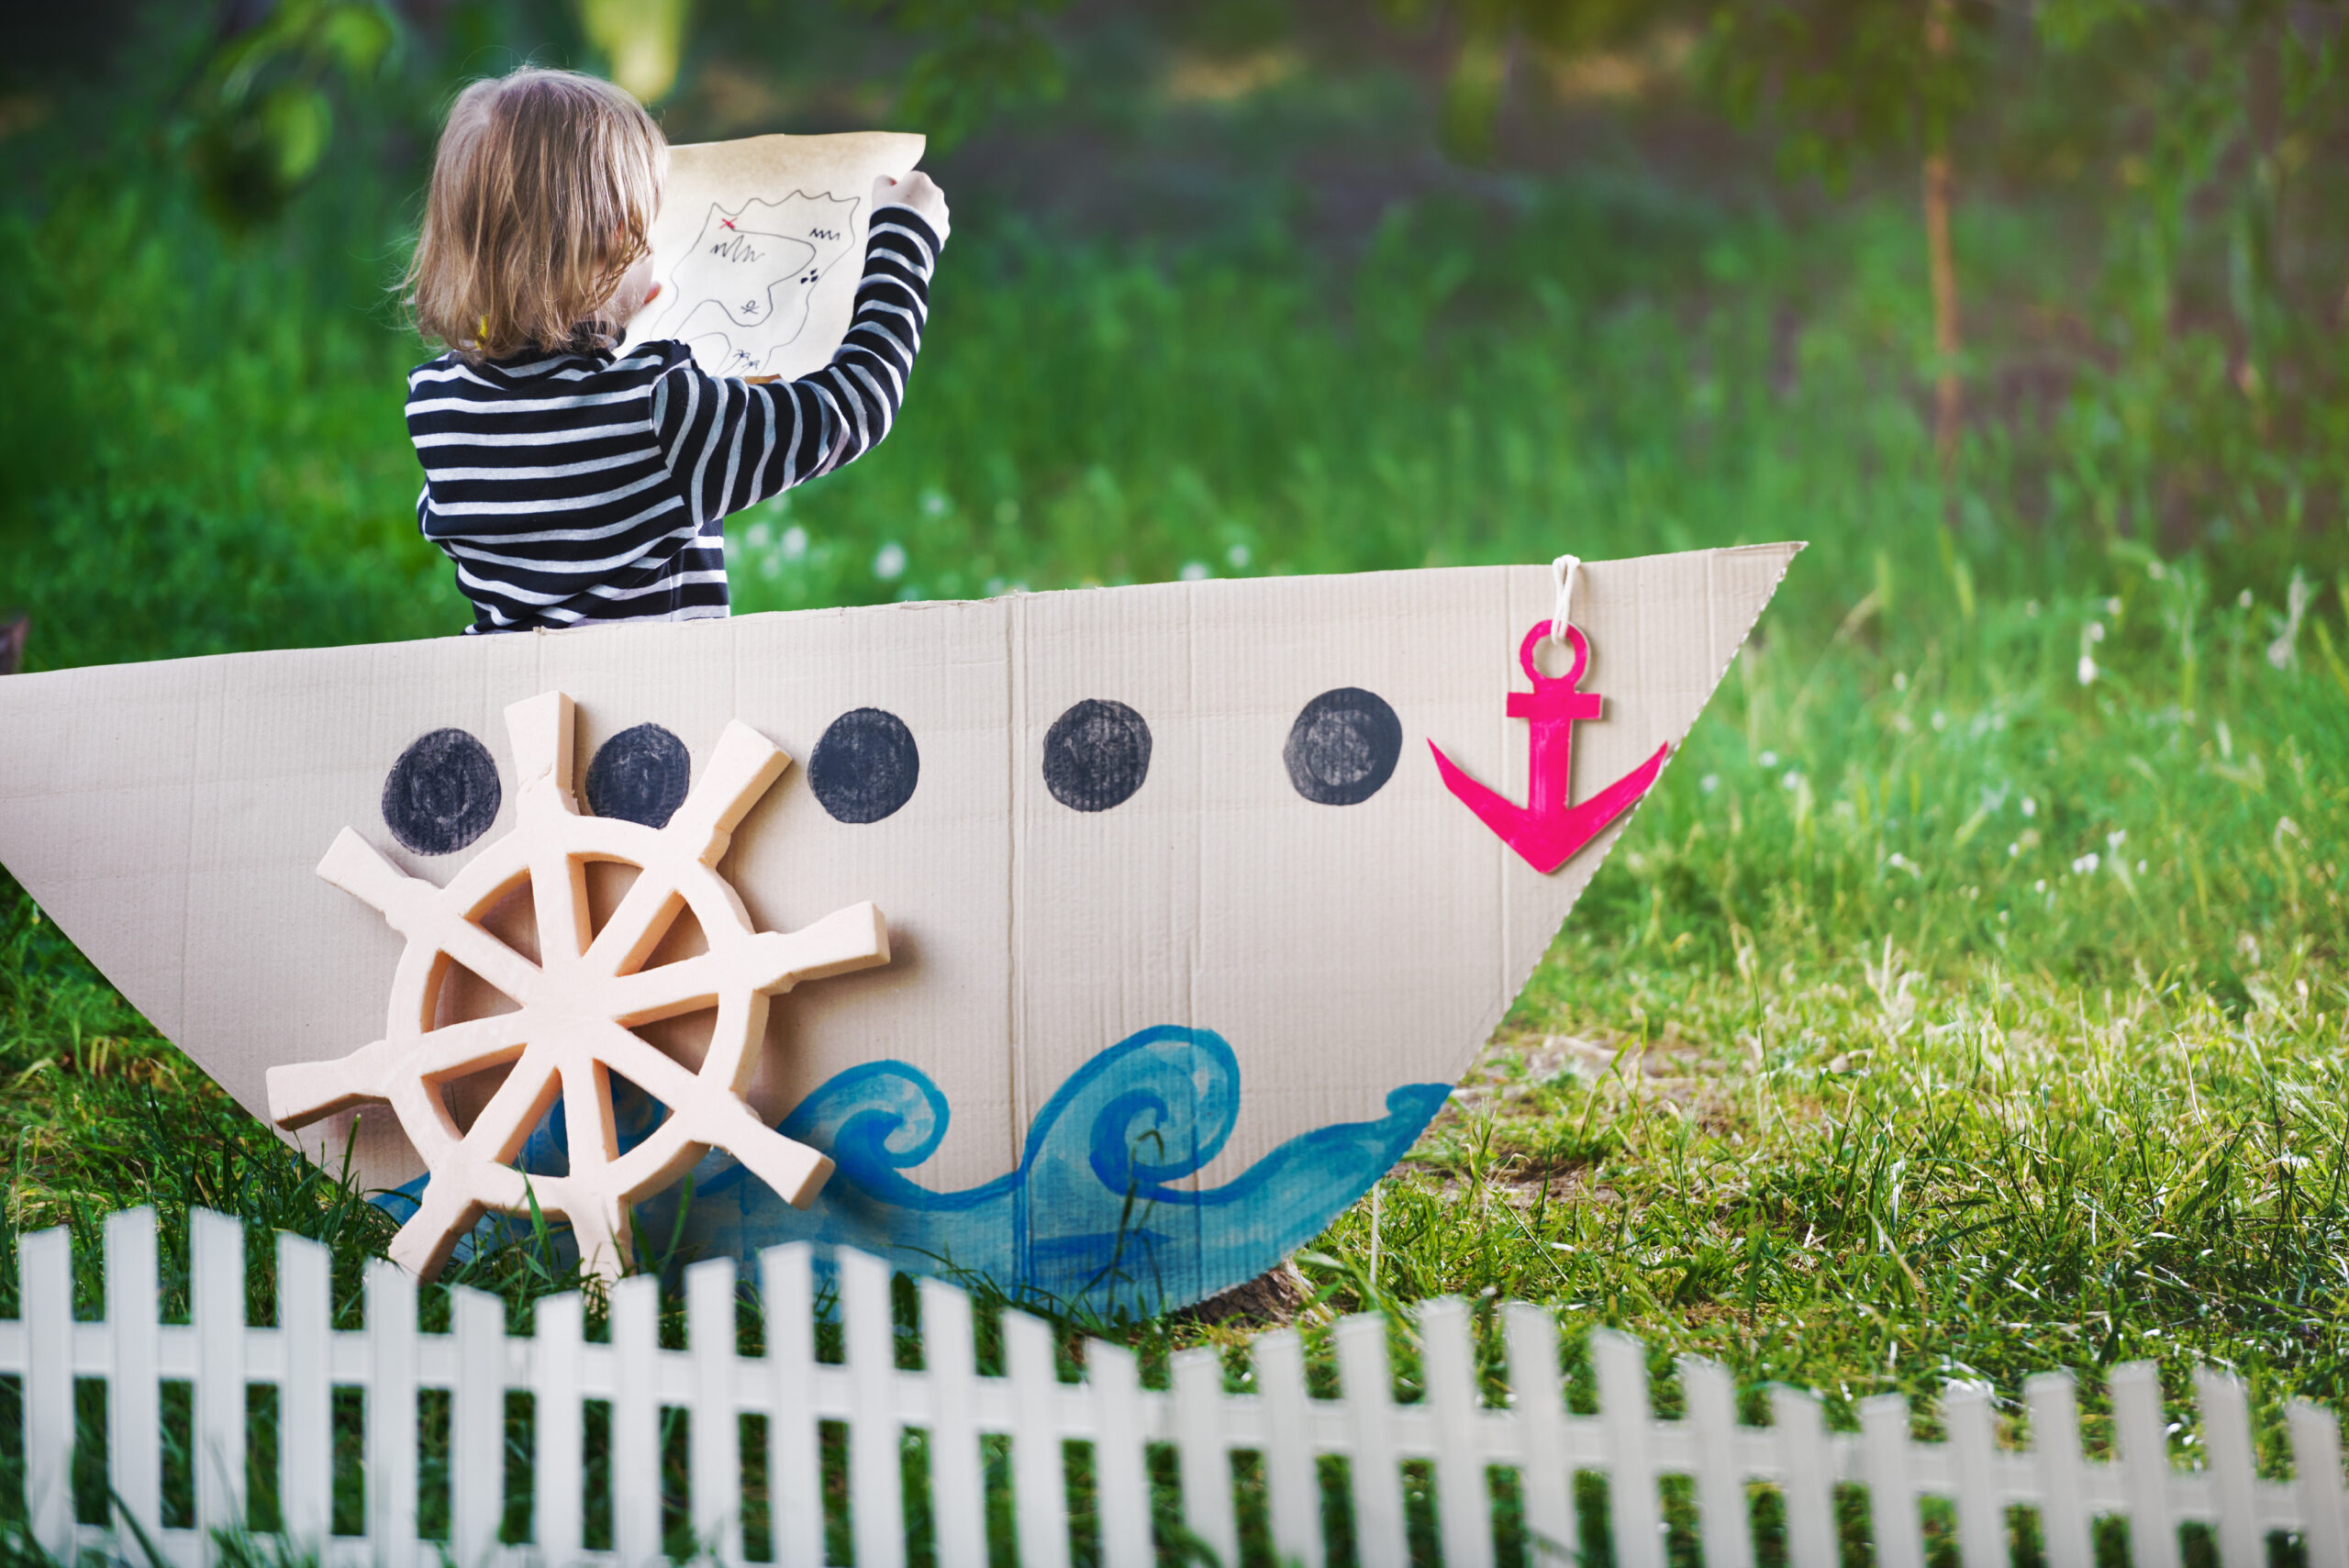 25 Pirate Books for Your Little Matey